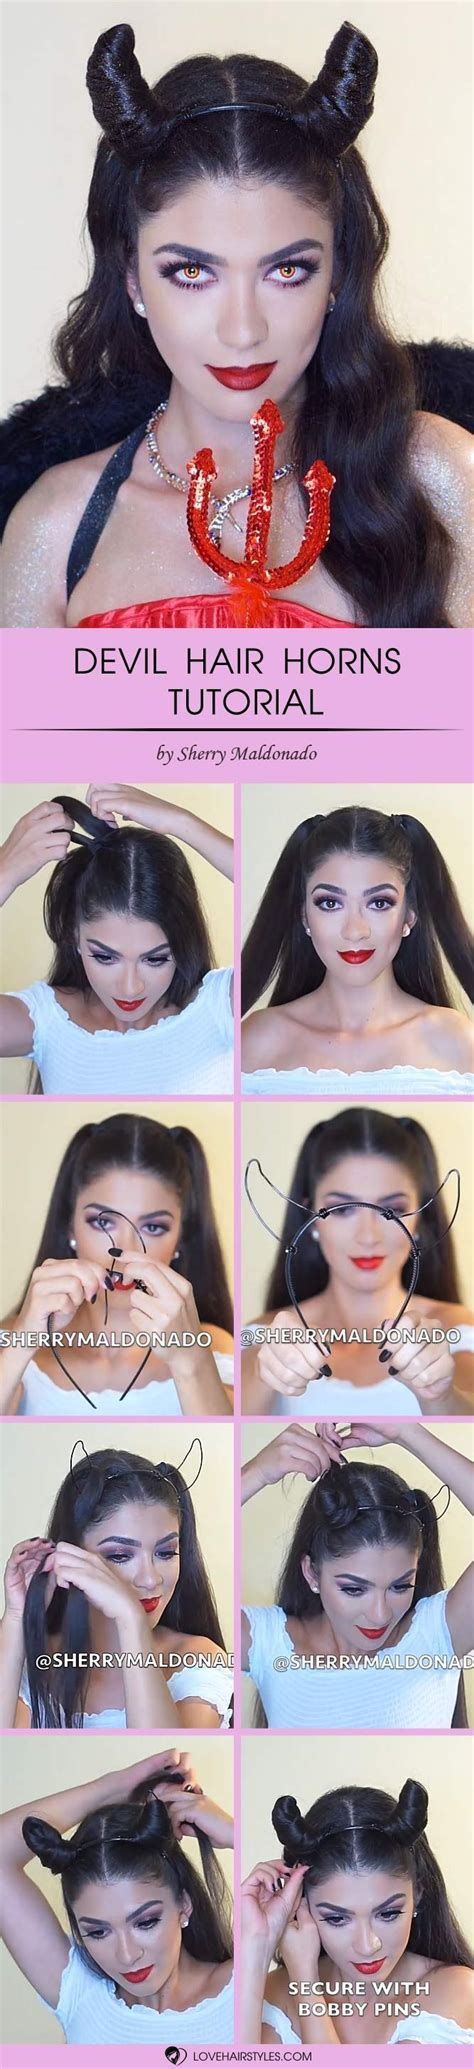 25 Easy Halloween Hairstyles To Make The Day Hair Horn Halloween